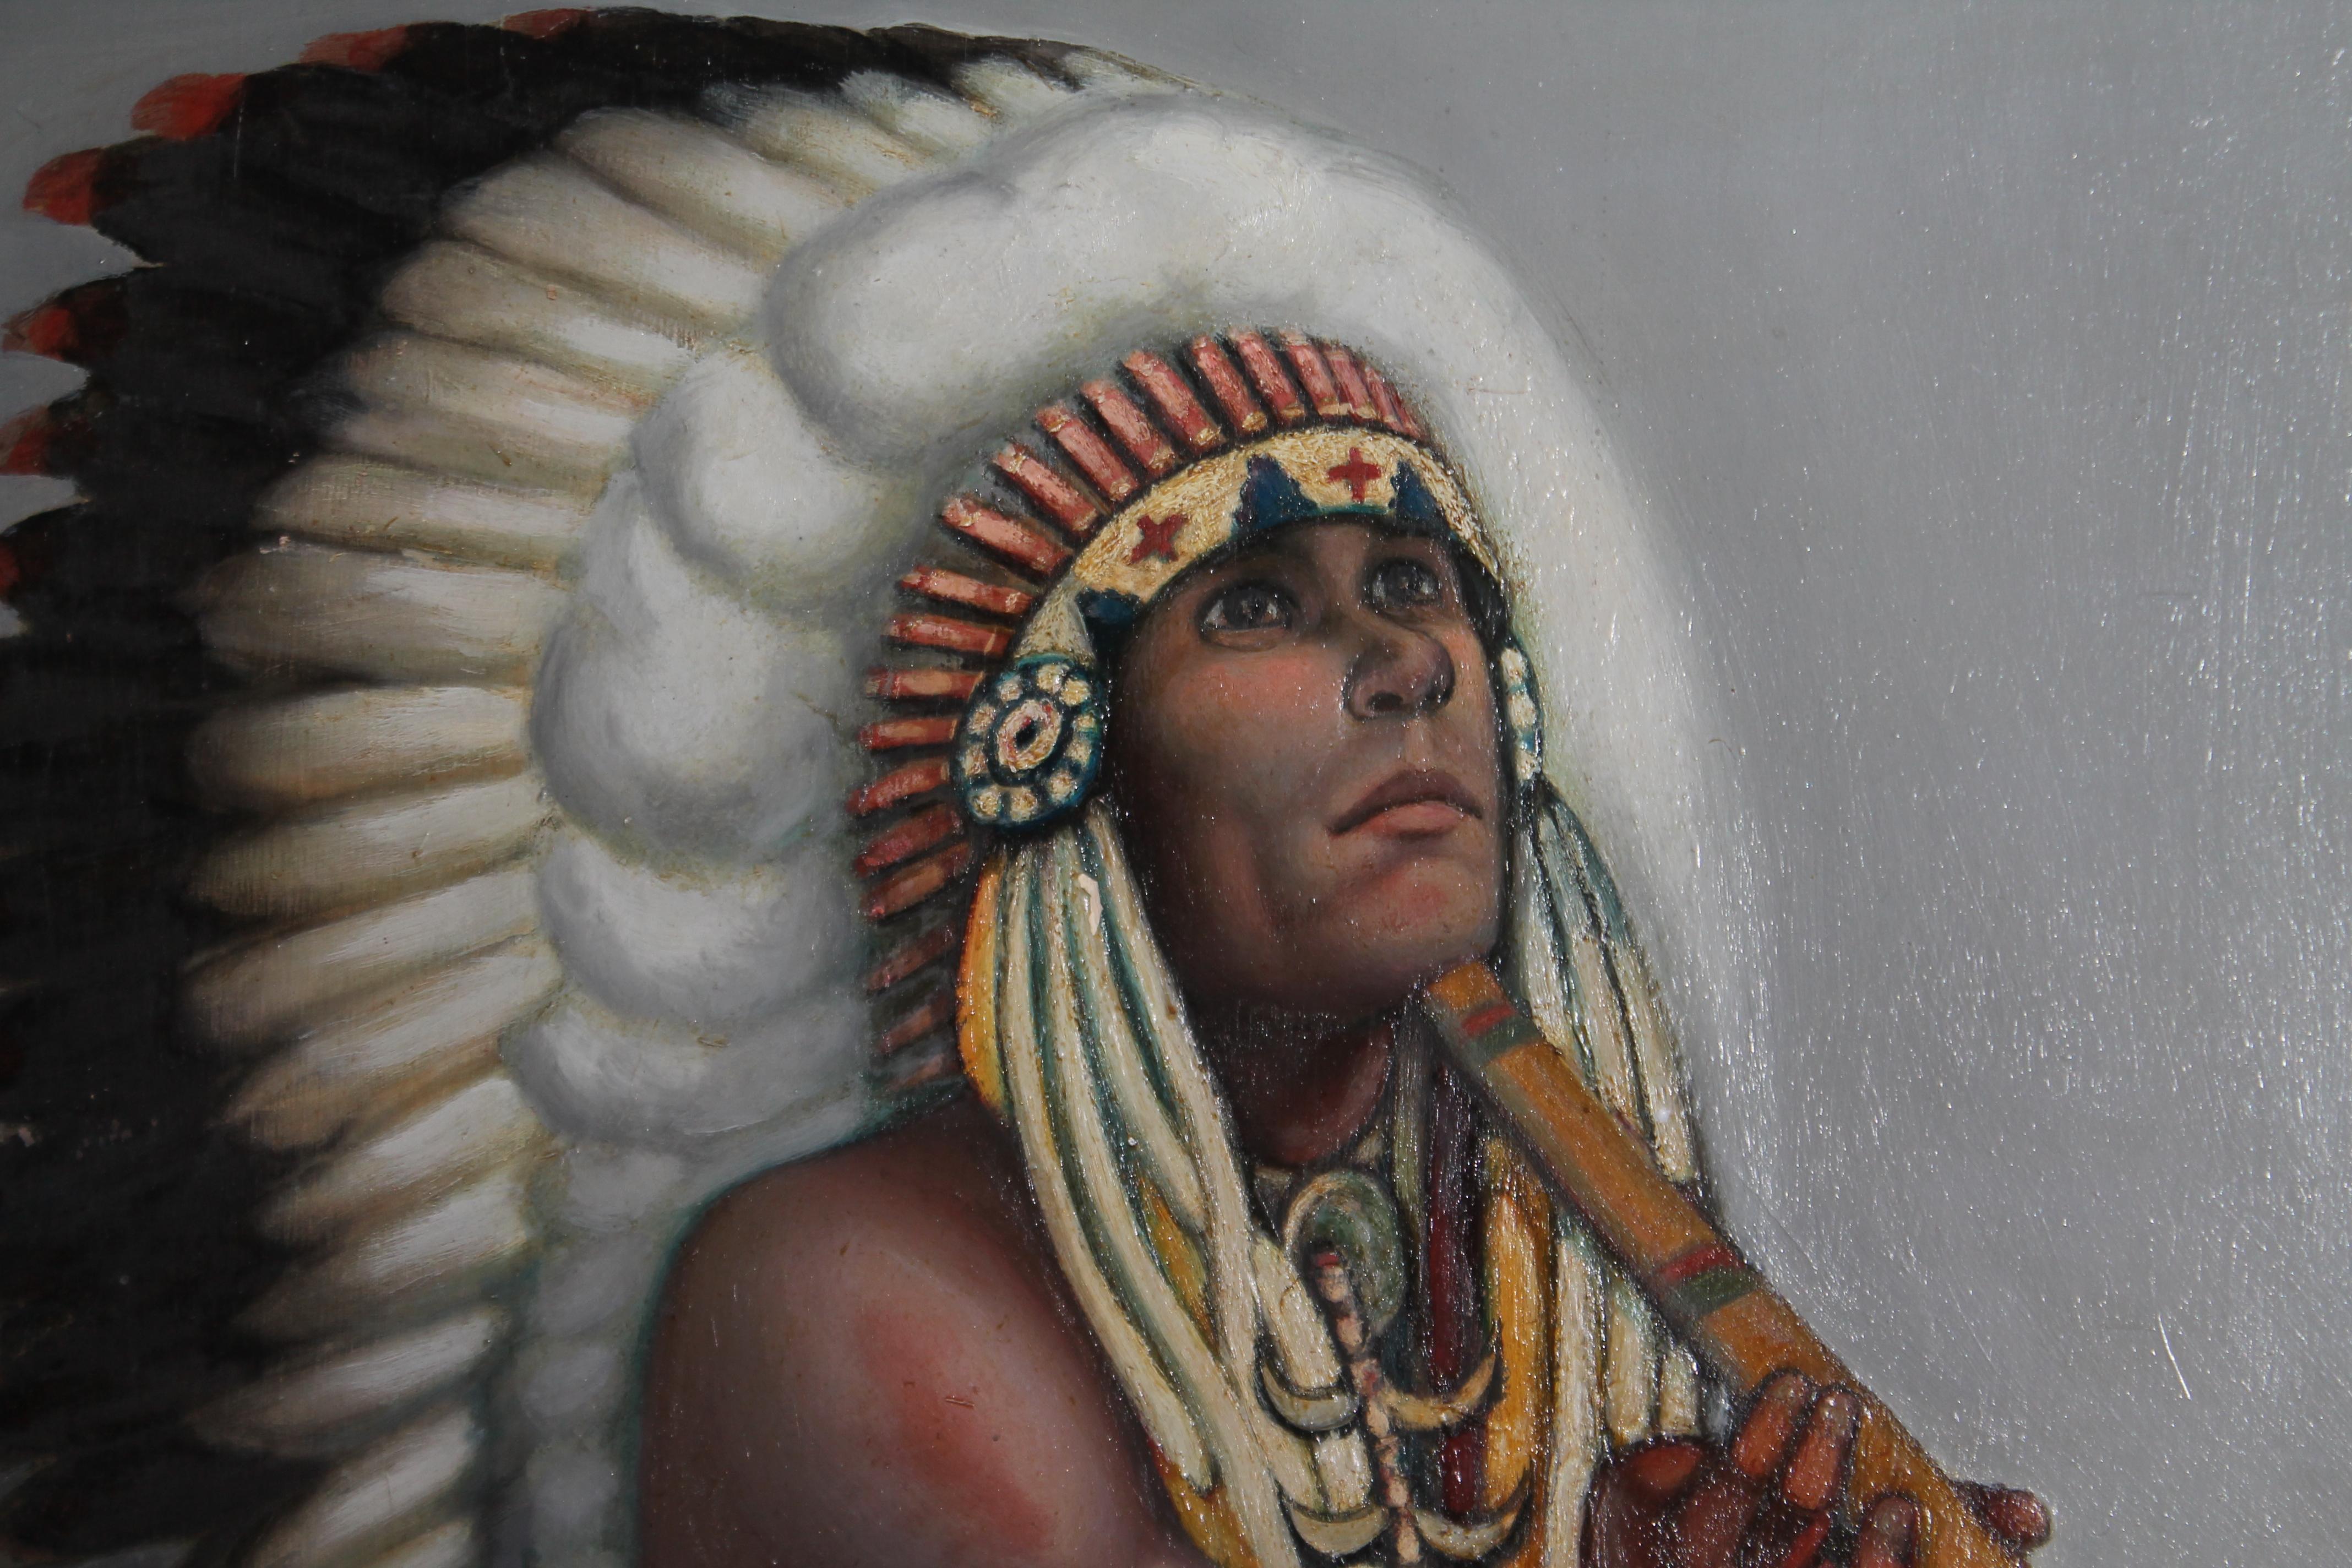 Adirondack Indian Chief Painting Signed & Dated 1936 For Sale